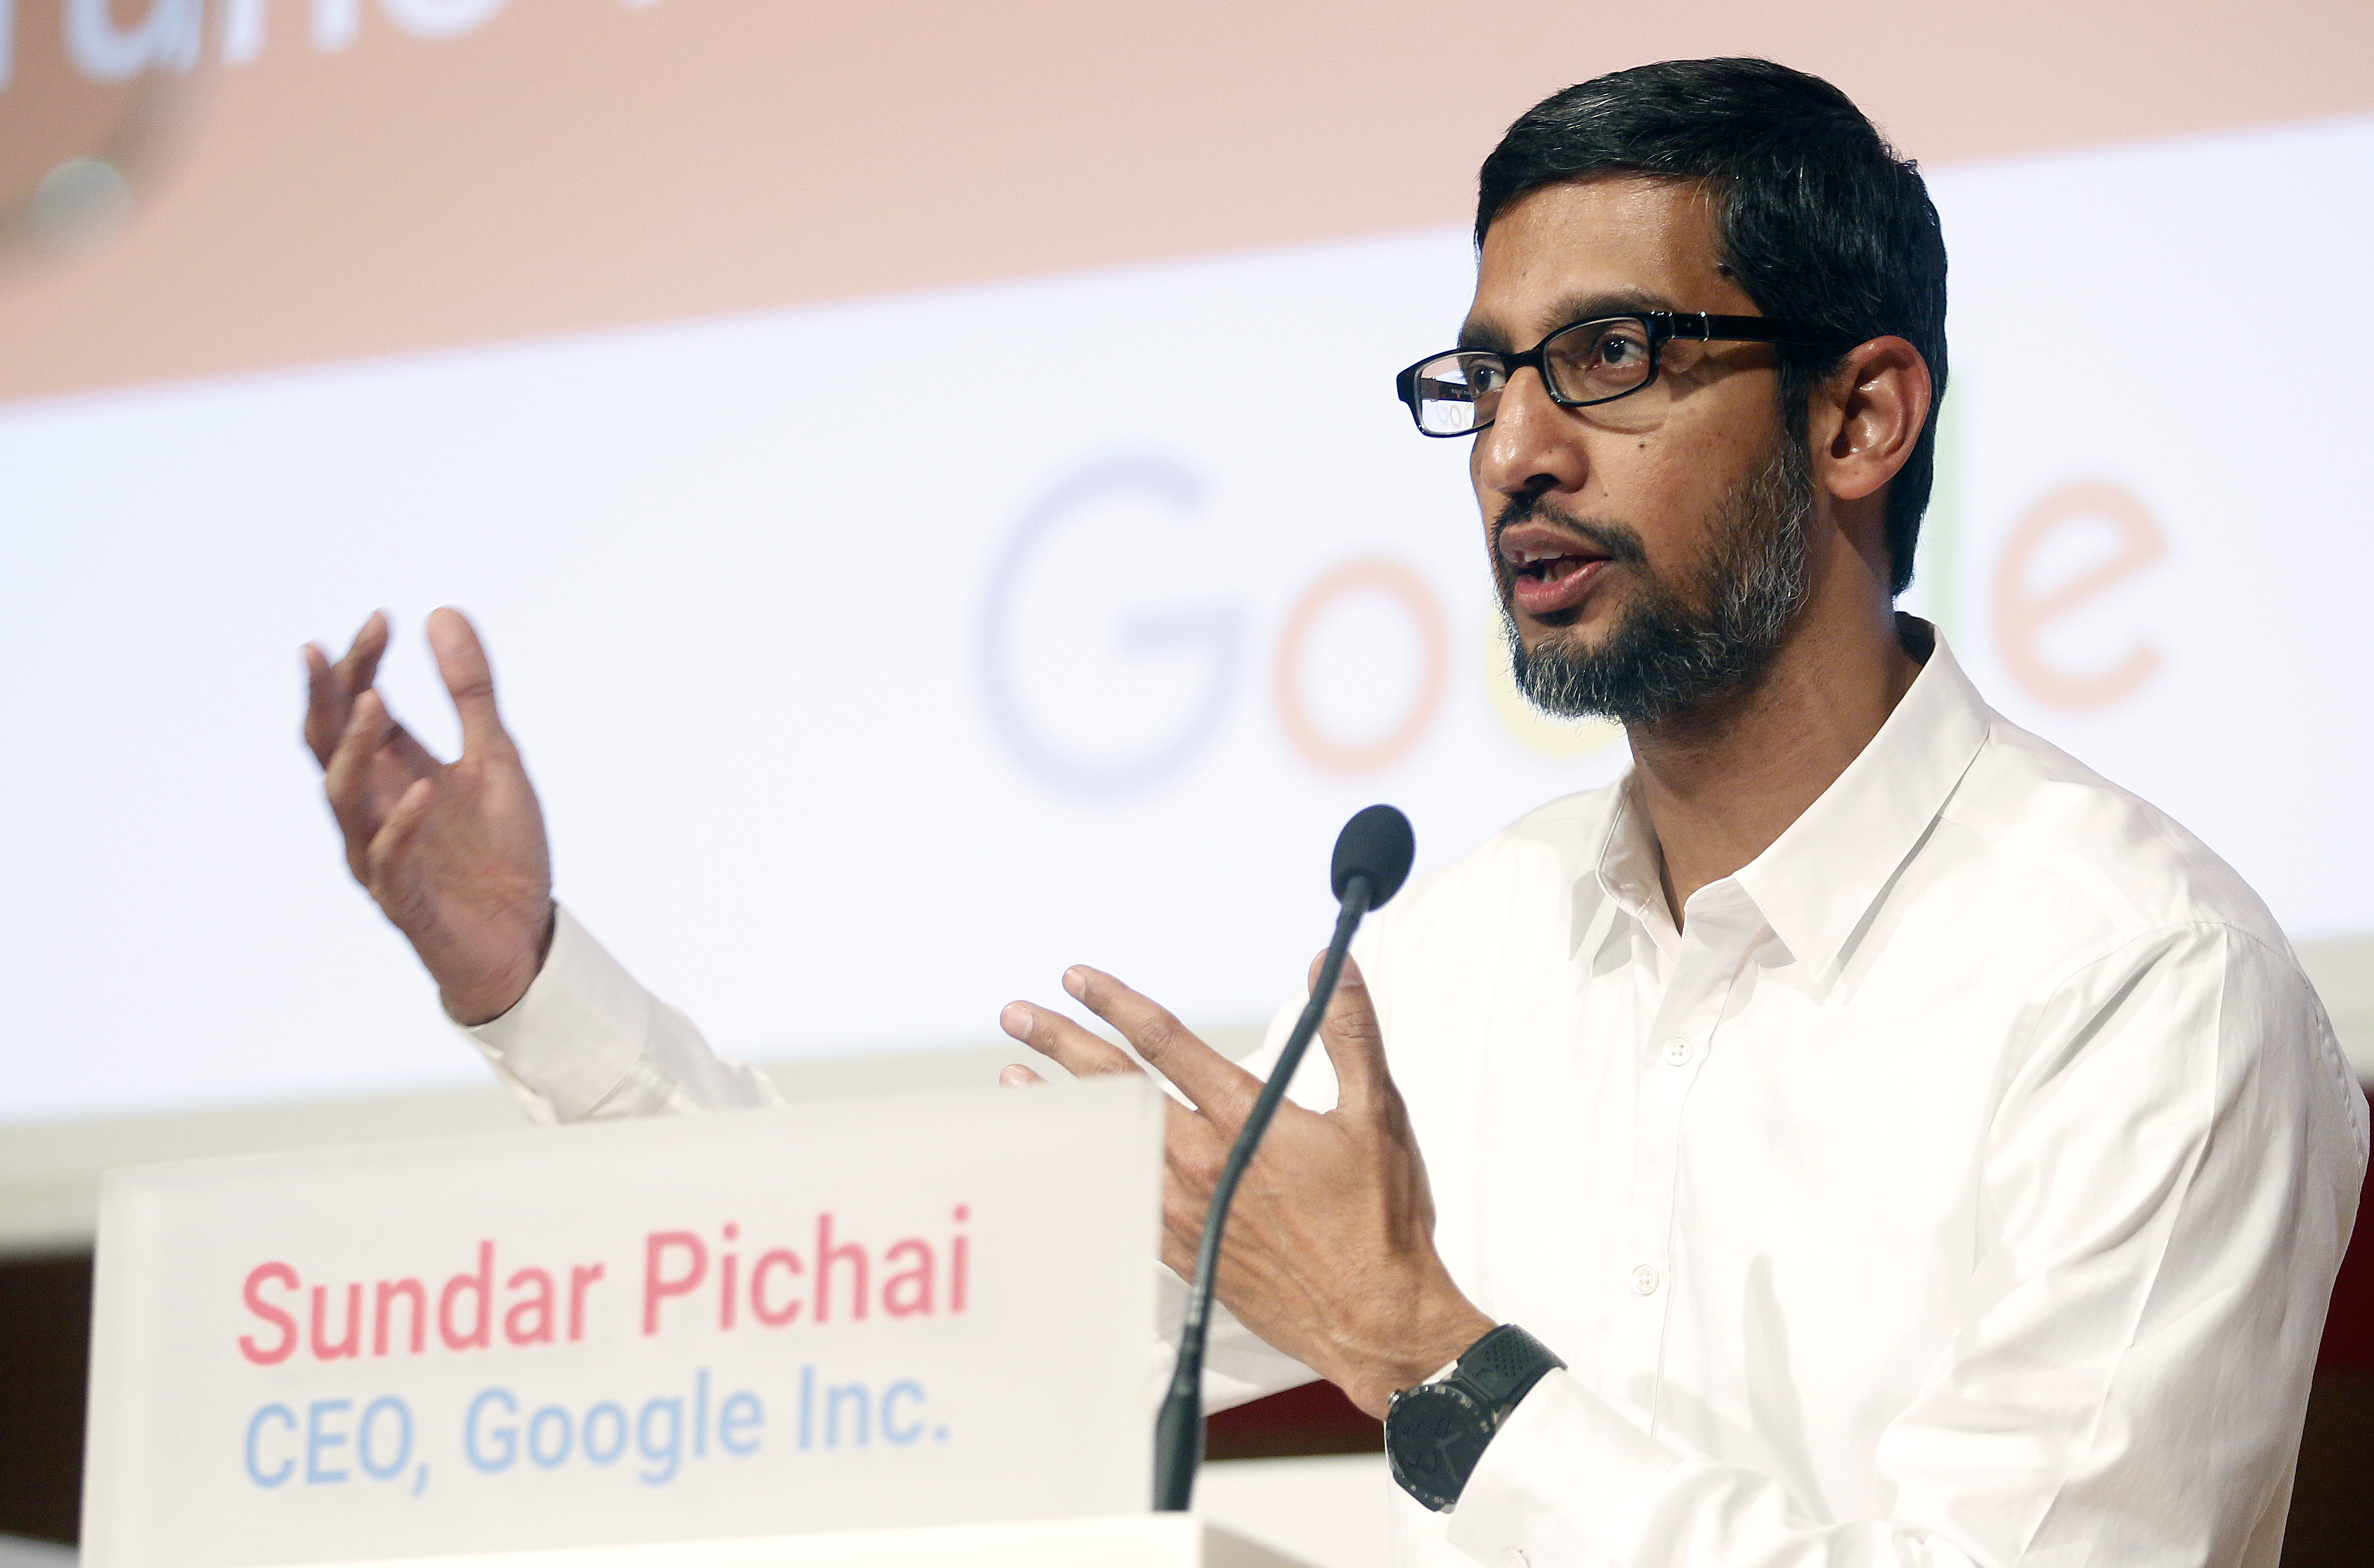 Google CEO, Sundar Pichai delivers a speech to the Sciences Po students on February 24, 2016 in Paris, France. (Chesnot—Getty Images)